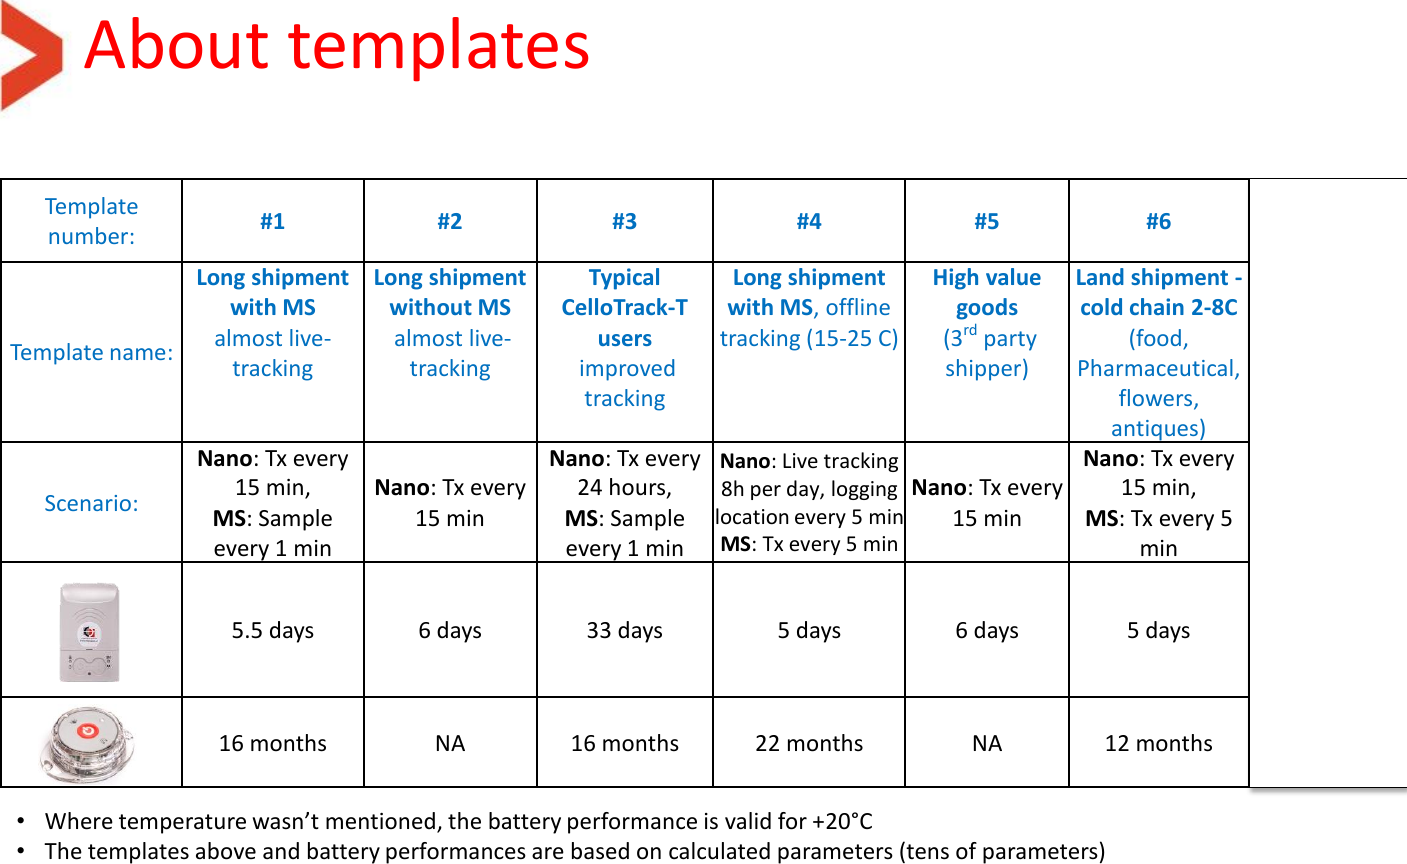 About templates •Where temperature wasn’t mentioned, the battery performance is valid for +20°C •The templates above and battery performances are based on calculated parameters (tens of parameters) Template number: #1 #2 #3 #4 #5 #6 #7 Template name: Long shipment with MS almost live-tracking Long shipment without MS  almost live-tracking Typical CelloTrack-T users  improved tracking Long shipment with MS, offline tracking (15-25 C) High value goods  (3rd party shipper) Land shipment - cold chain 2-8C  (food, Pharmaceutical, flowers, antiques) Employee safety  (lone worker) Scenario: Nano: Tx every 15 min, MS: Sample every 1 min Nano: Tx every 15 min Nano: Tx every 24 hours, MS: Sample every 1 min Nano: Live tracking 8h per day, logging location every 5 min MS: Tx every 5 min Nano: Tx every 15 min Nano: Tx every 15 min, MS: Tx every 5 min Nano: Tx every 6 hours  5.5 days  6 days 33 days 5 days 6 days 5 days 25 days  (optimal condition) 11 days  (harsh conditions)  16 months  NA 16 months 22 months NA 12 months NA 